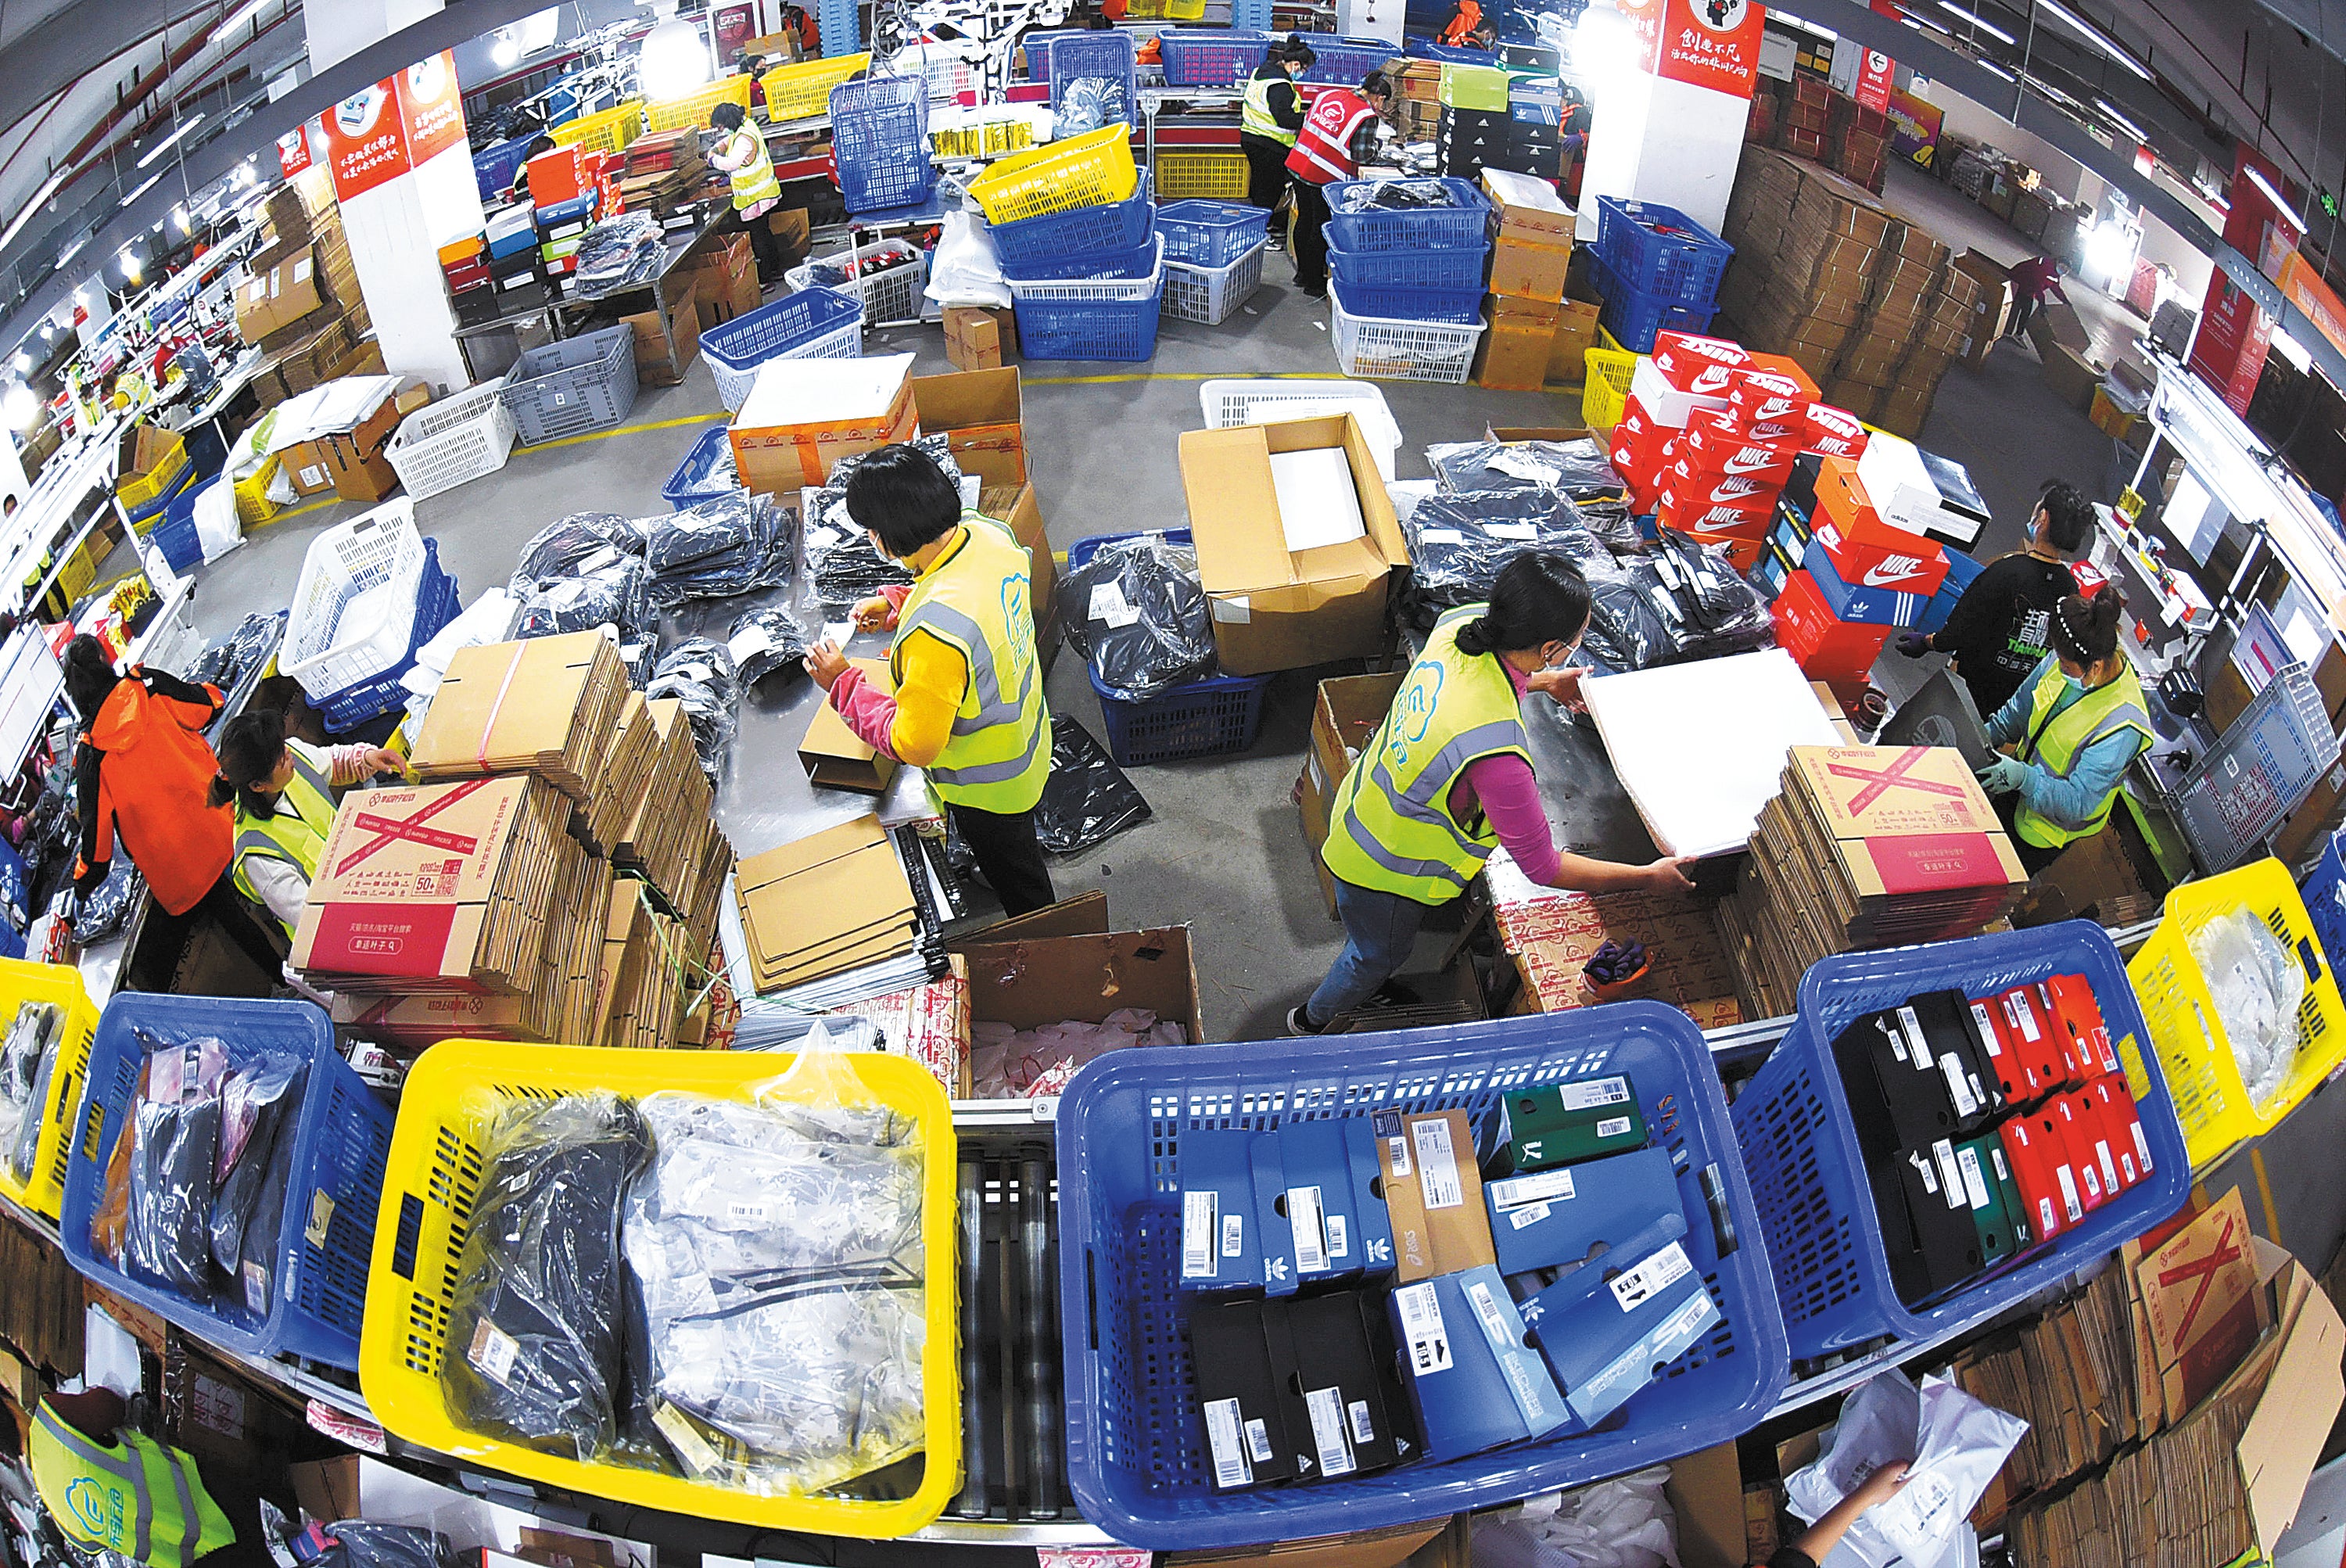 Workers busy packaging goods at an e-commerce industrial zone in Lianyungang, Jiangsu province, as China’s Singles Day shopping festival starts